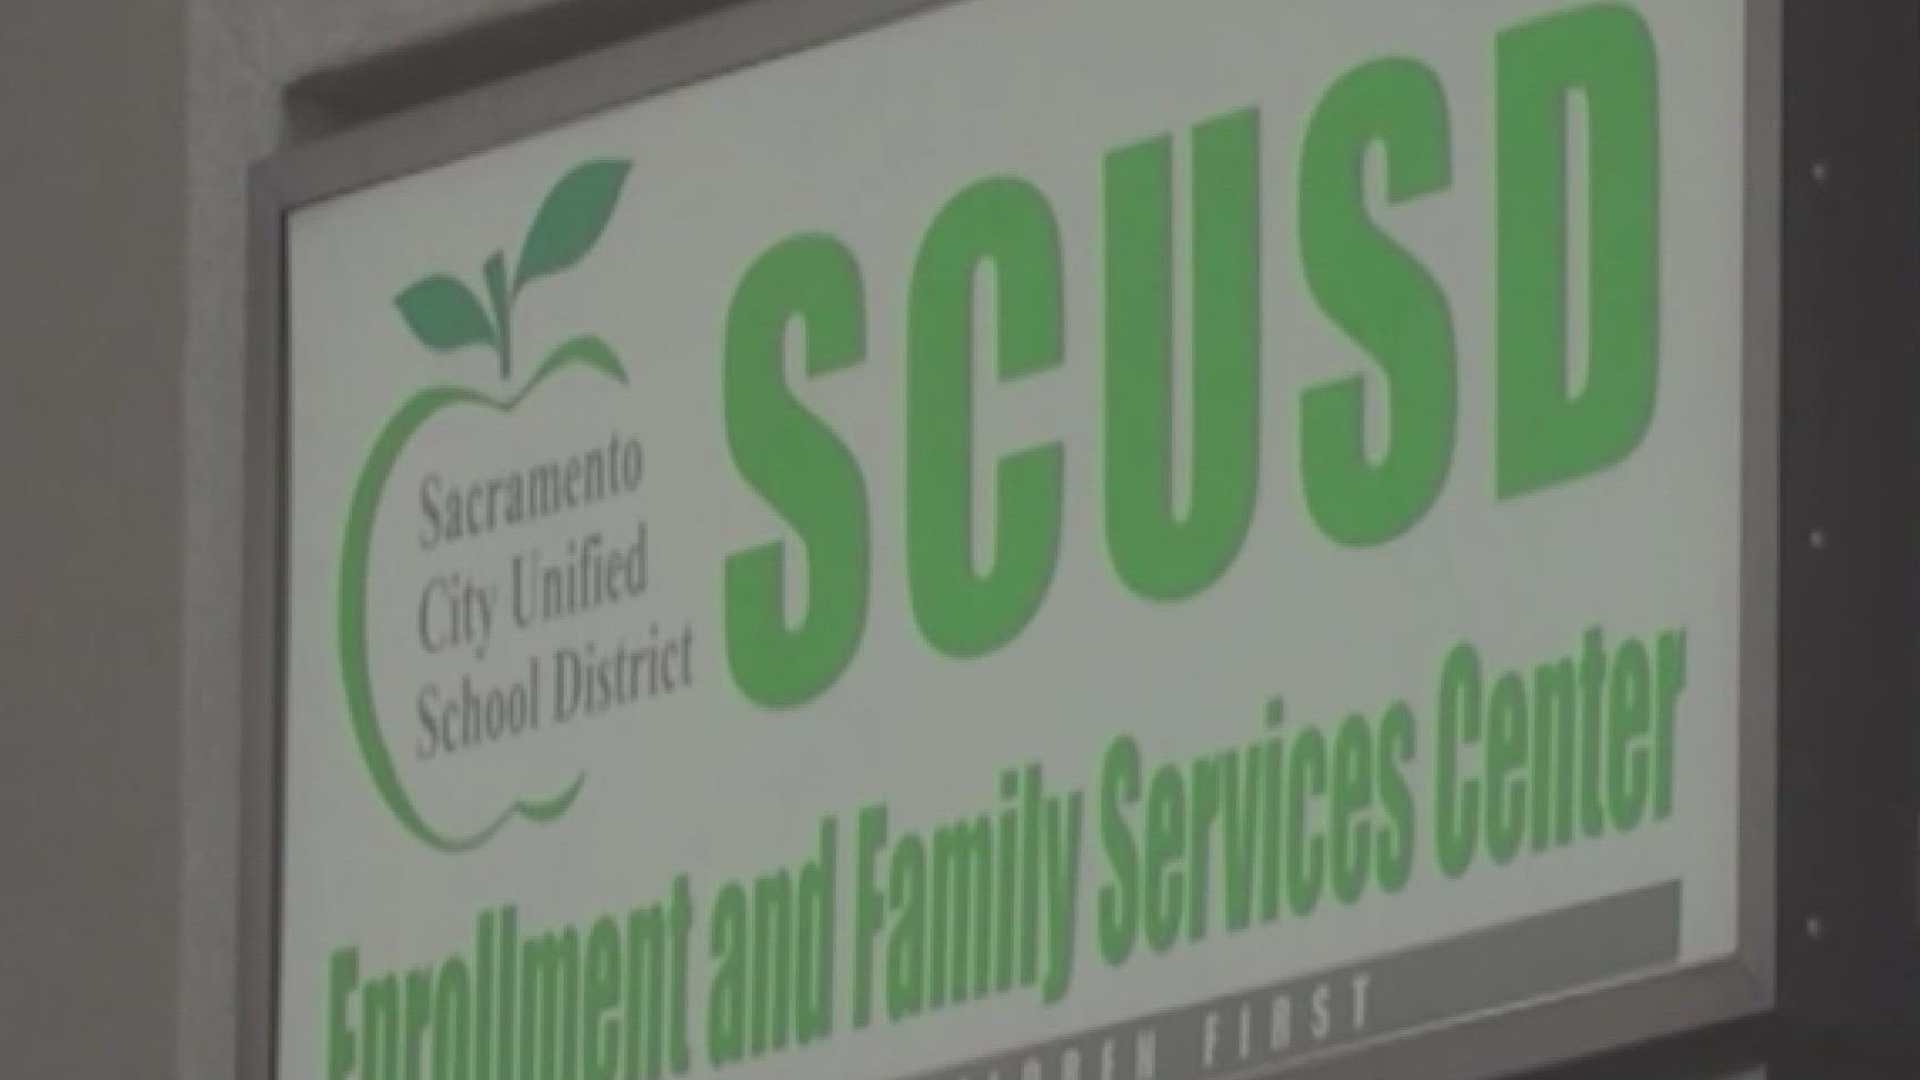 District officials say they are working with substitute teachers to meet student needs and are offering free on-site testing